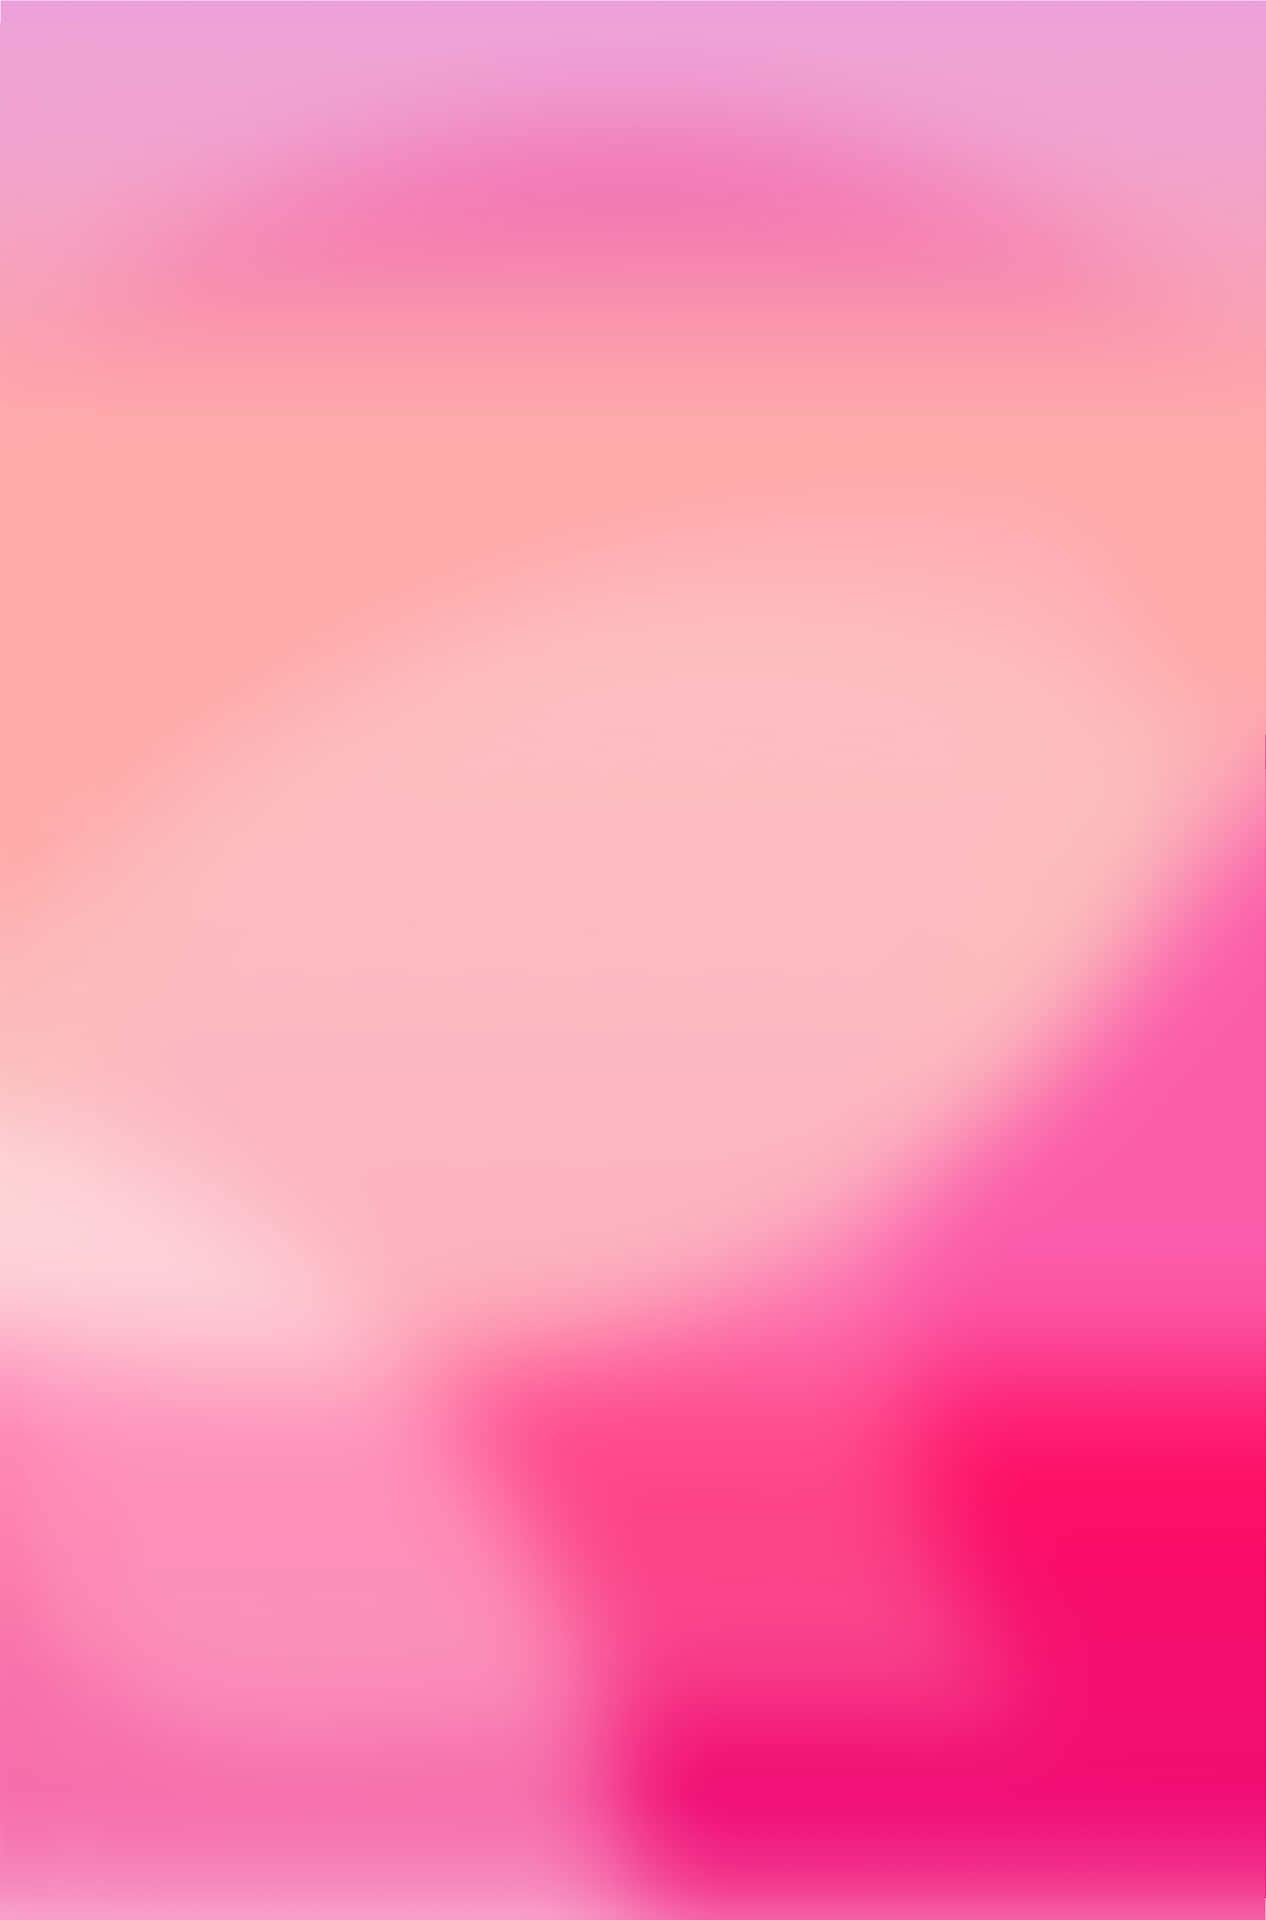 Pink Ombre Background 2732 X 4144